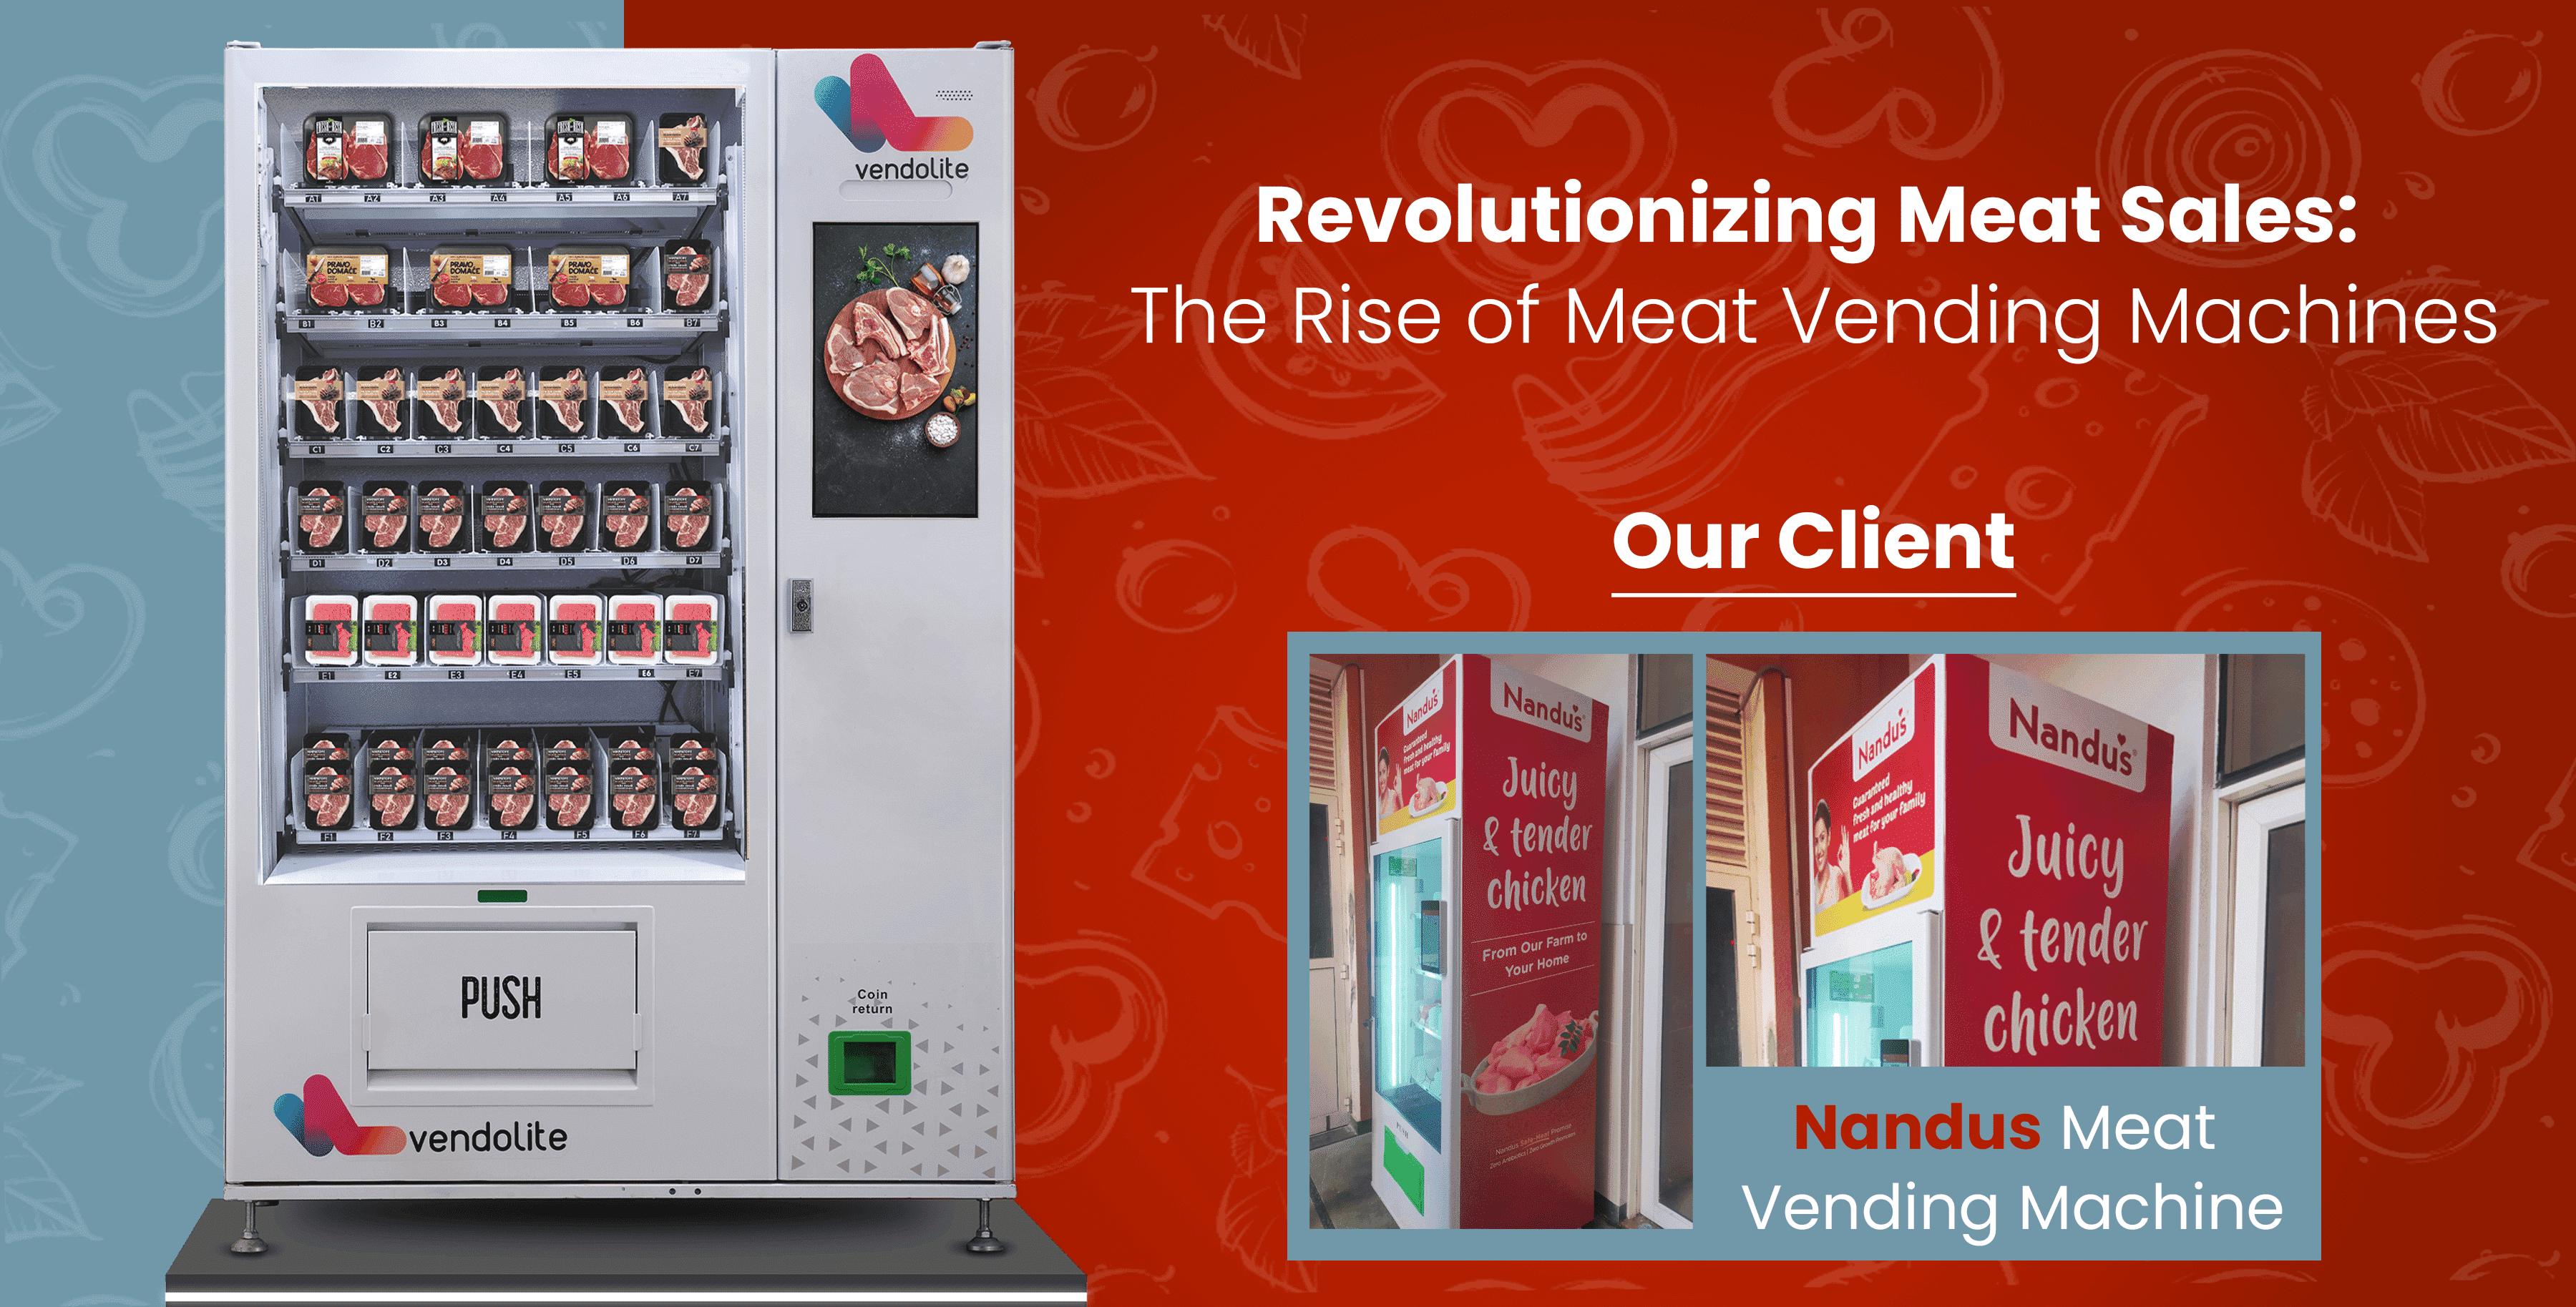 The Rise of Meat Vending Machines